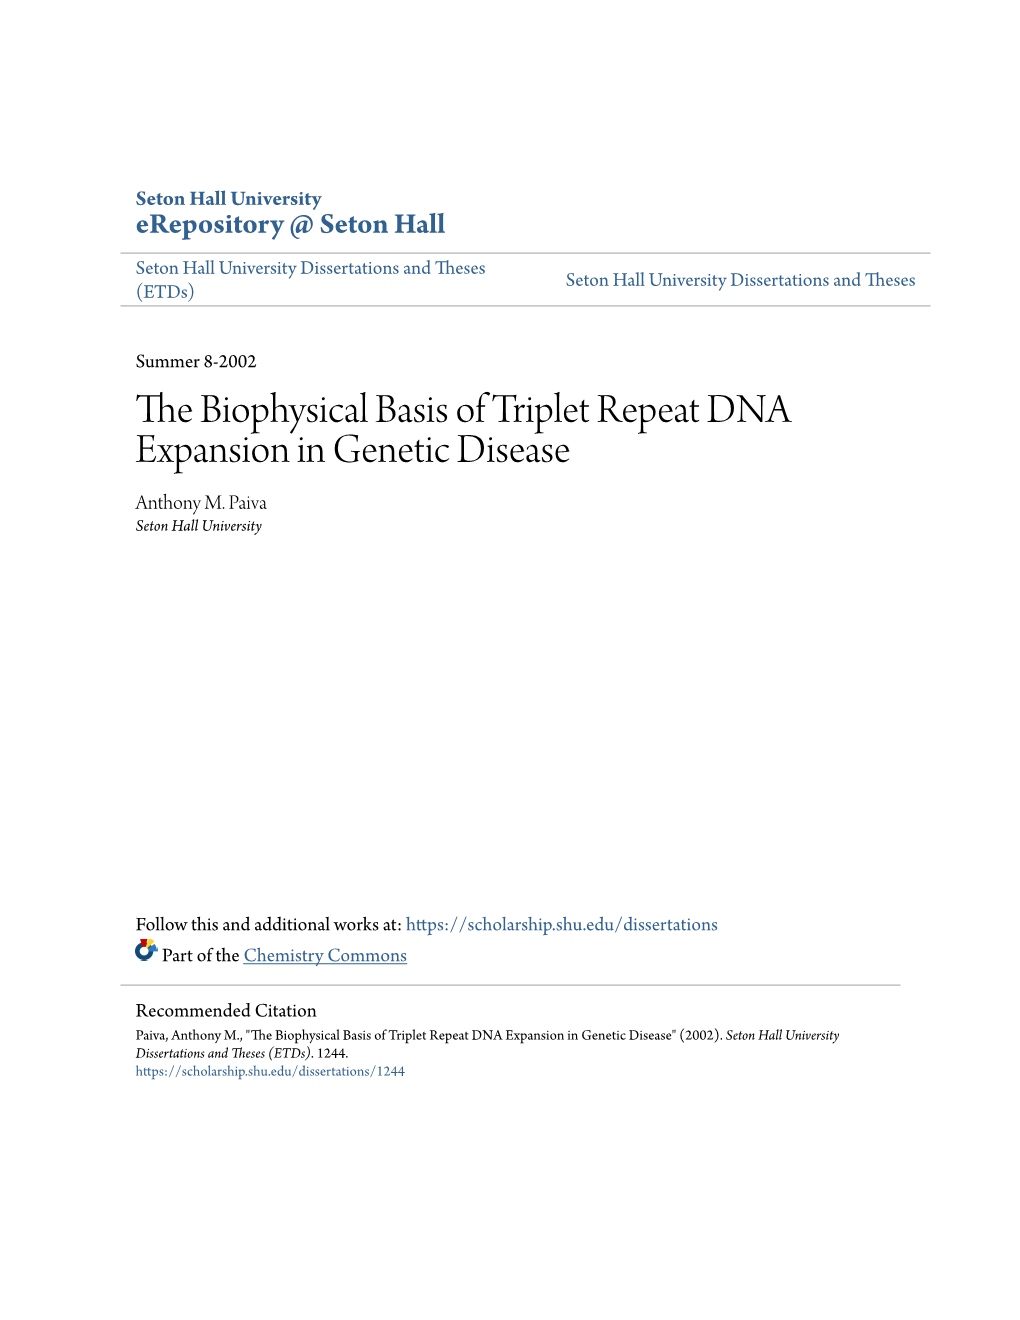 The Biophysical Basis of Triplet Repeat DNA Expansion in Genetic